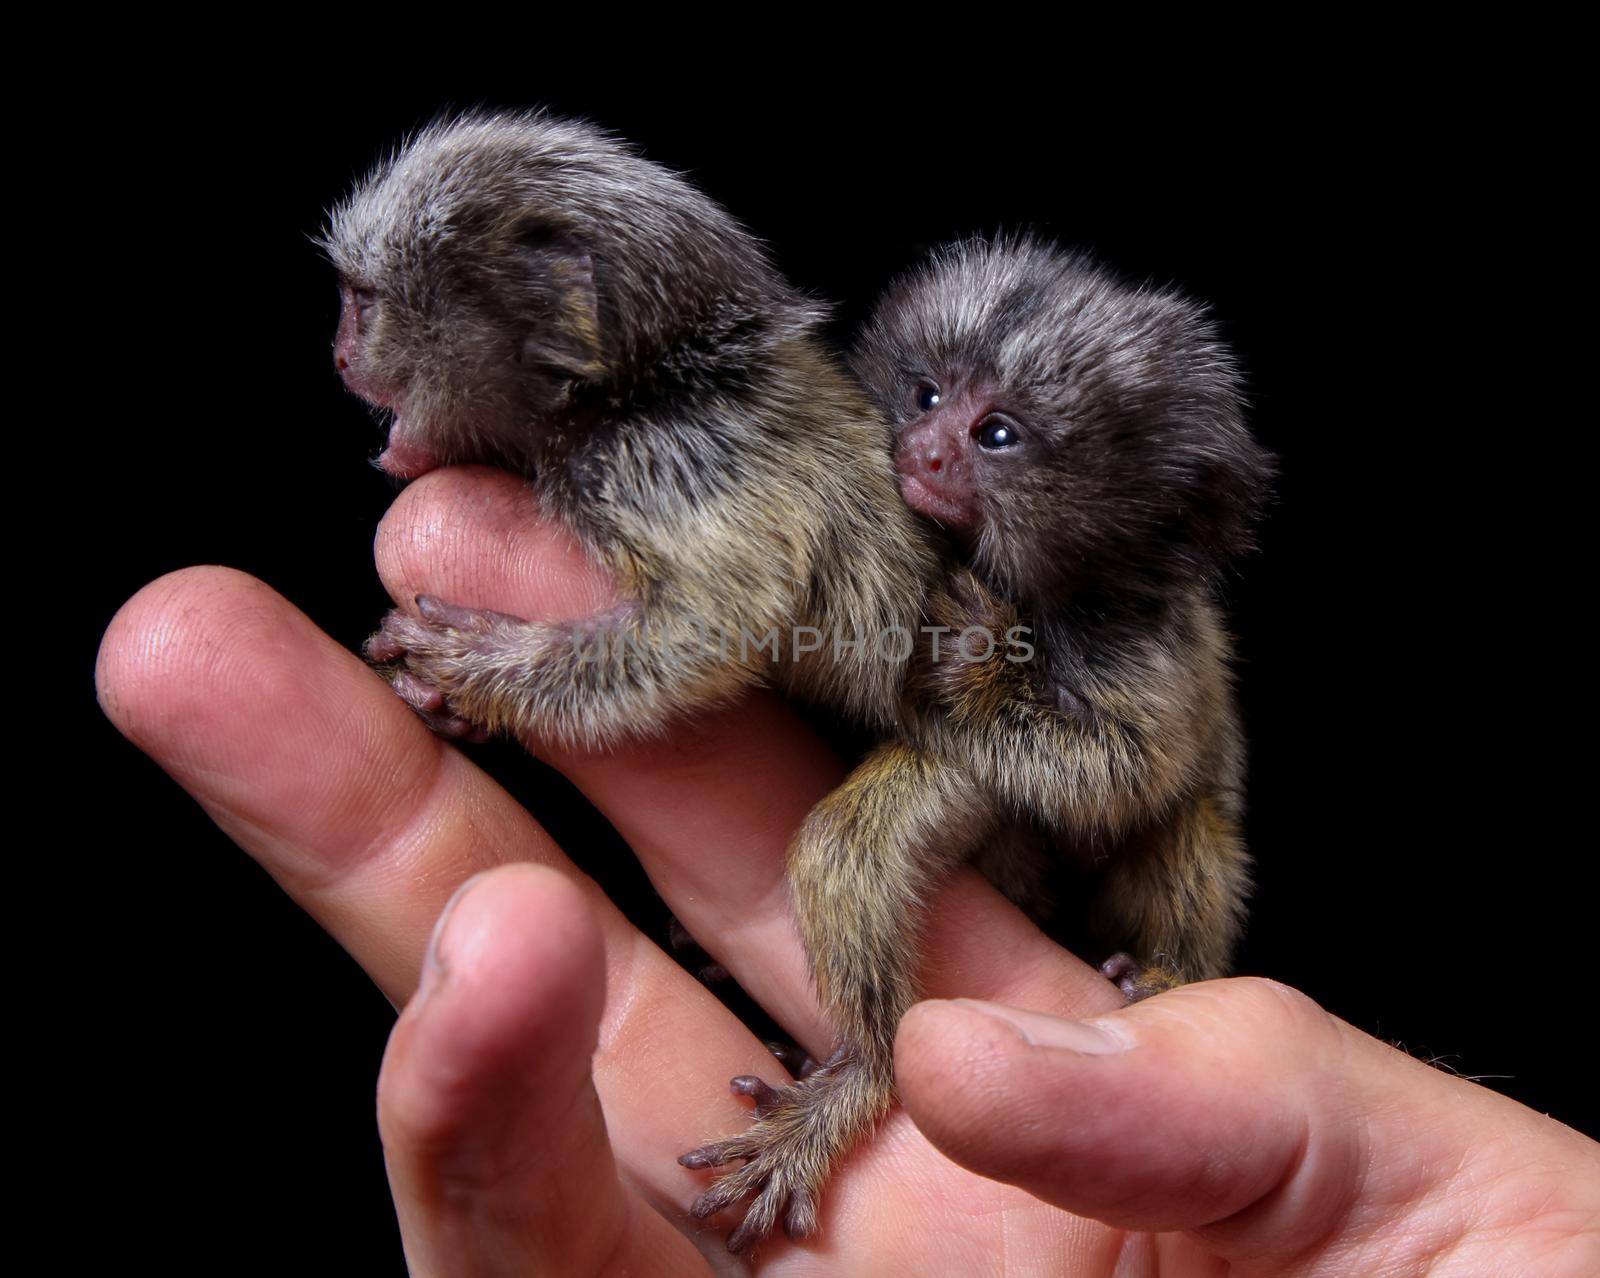 The common marmoset's babies on fingers isolated on black by RosaJay